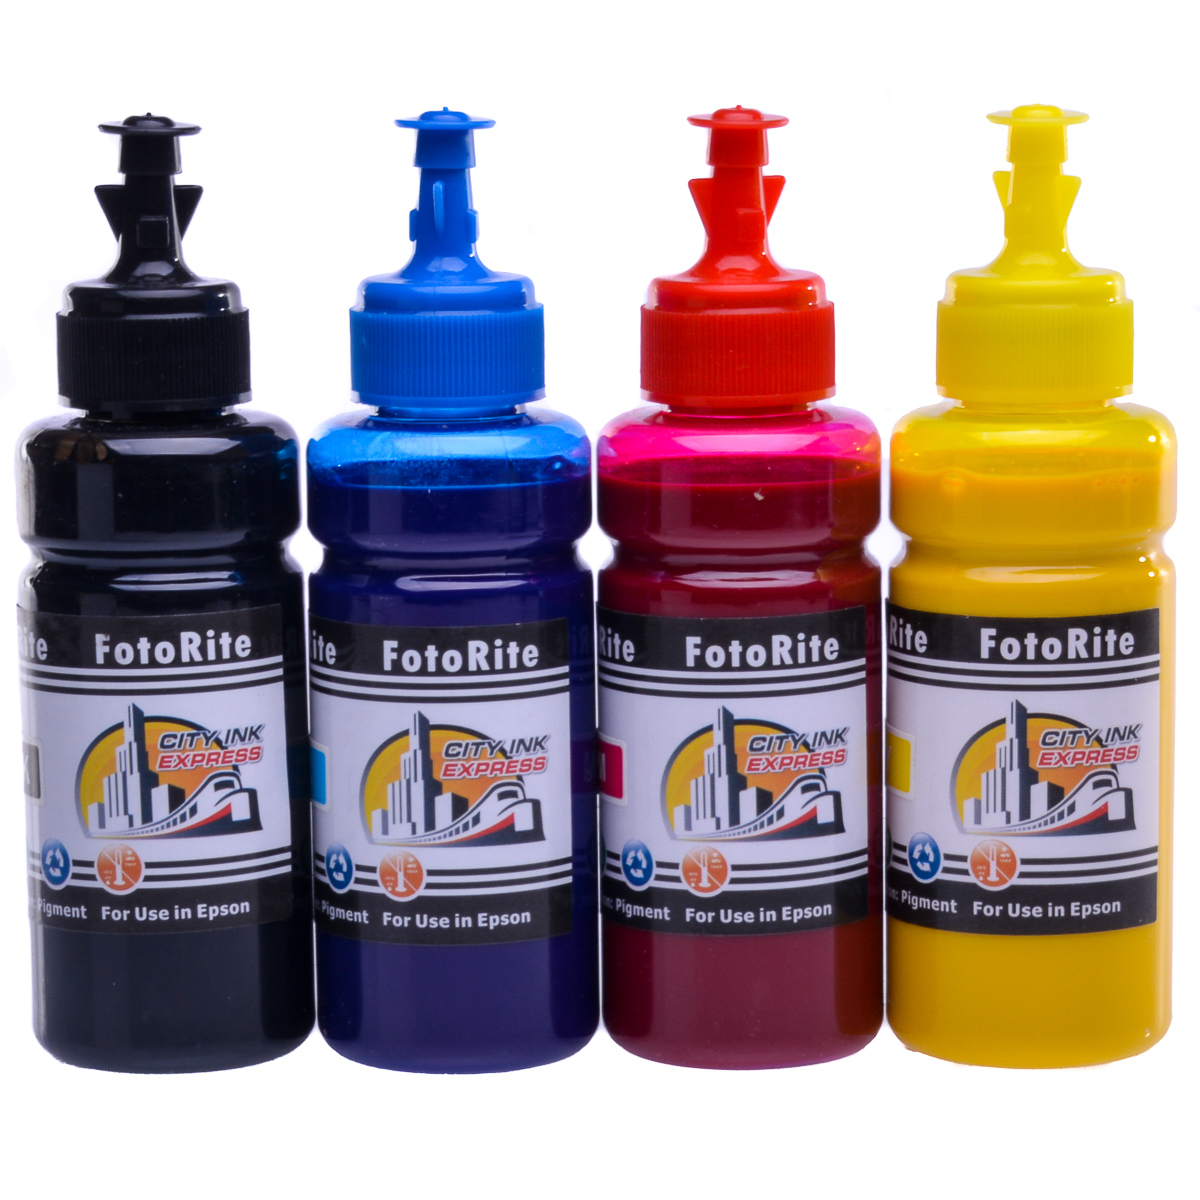 Cheap Multipack pigment ink refill replaces Epson WF-3825DWF